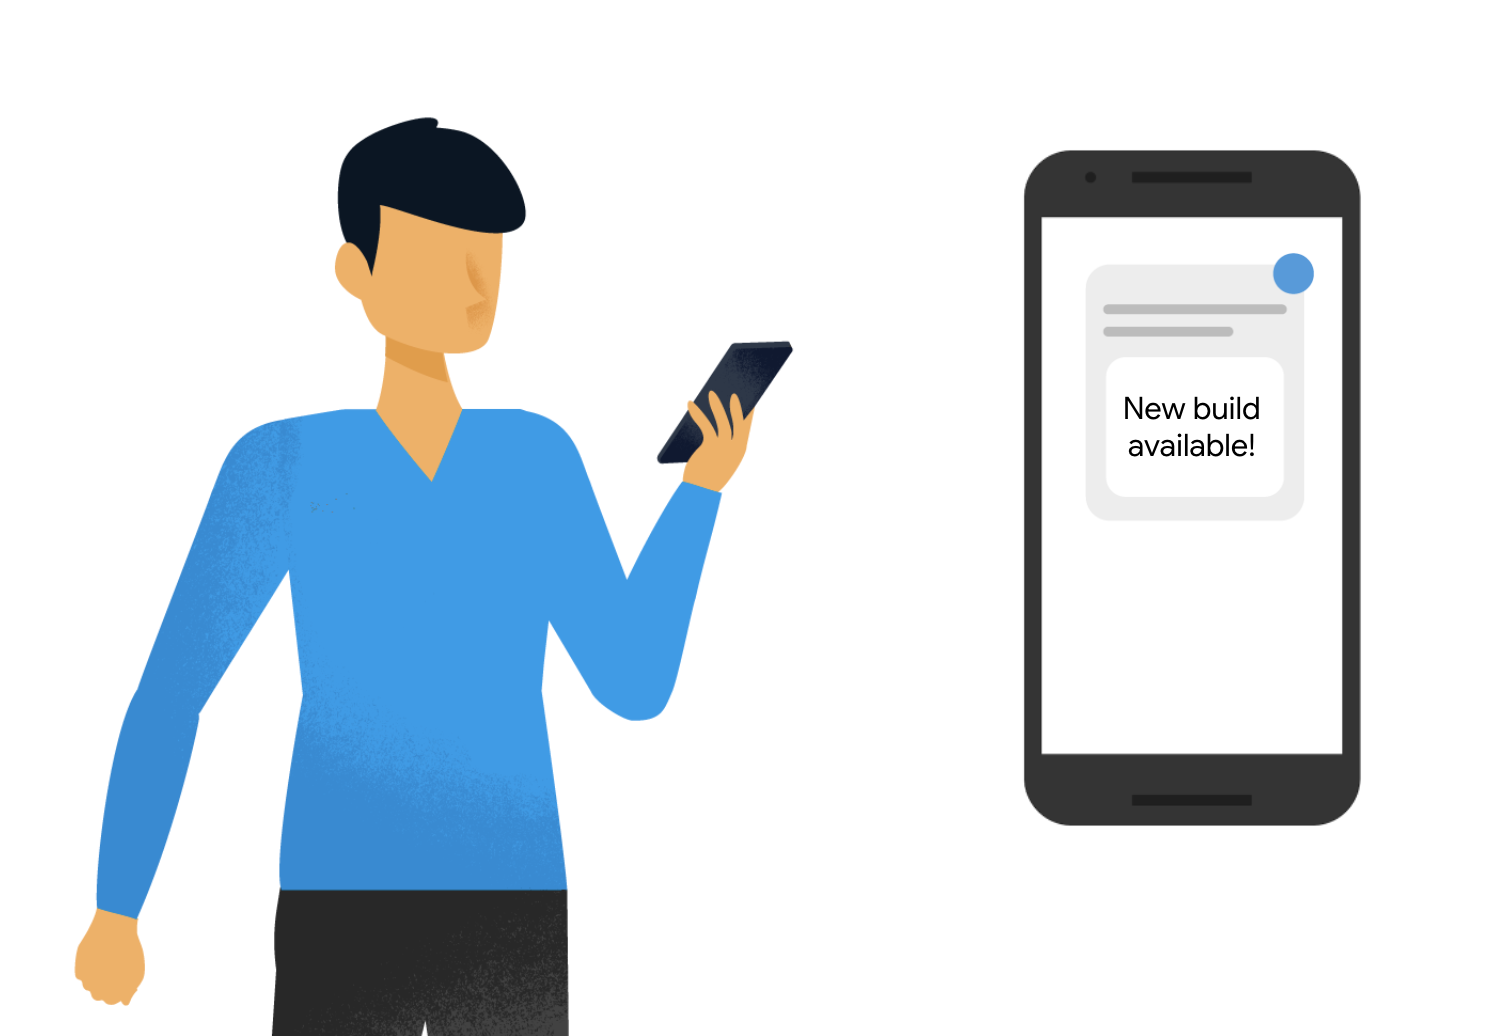 With our new Android SDK, you can now notify testers that a new version is available - directly inside the app - so your testers always stay up-to-date and give feedback on the version you care about most